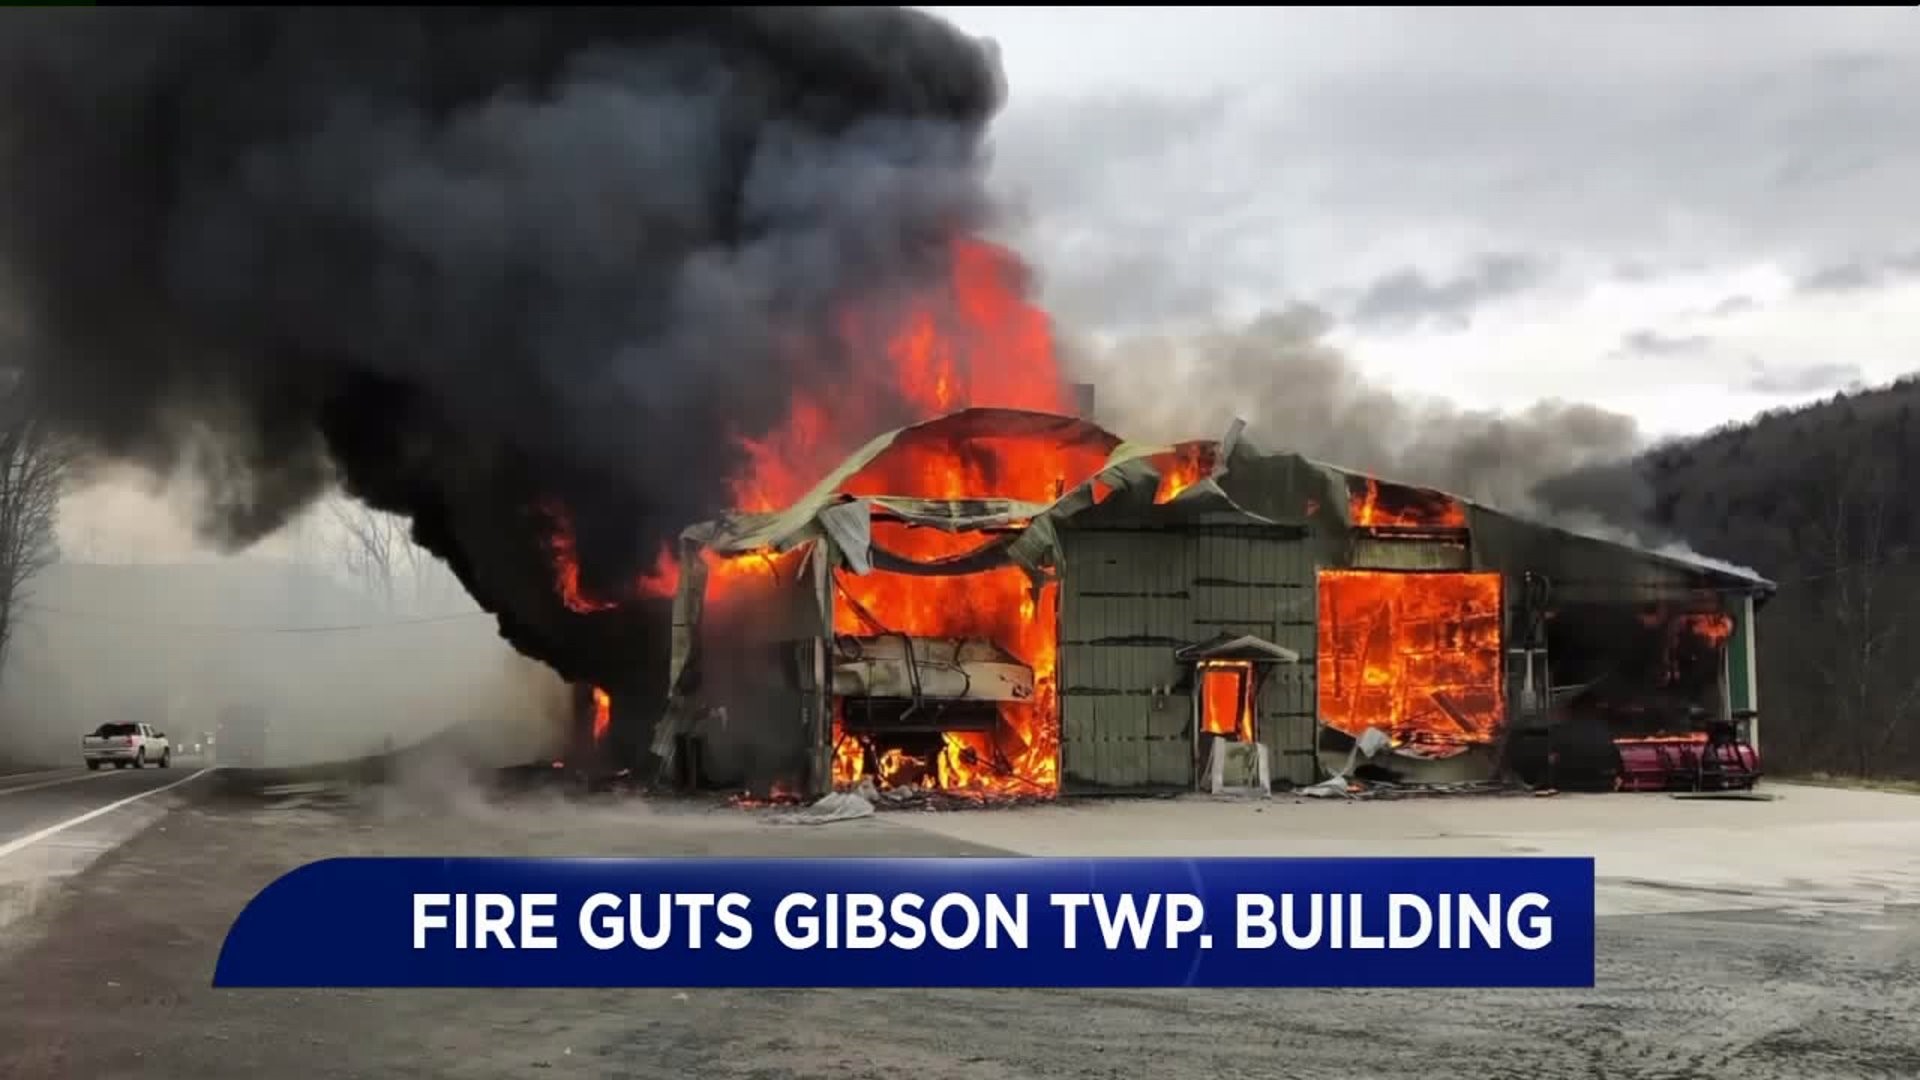 Gibson Township Building Destroyed in Fire